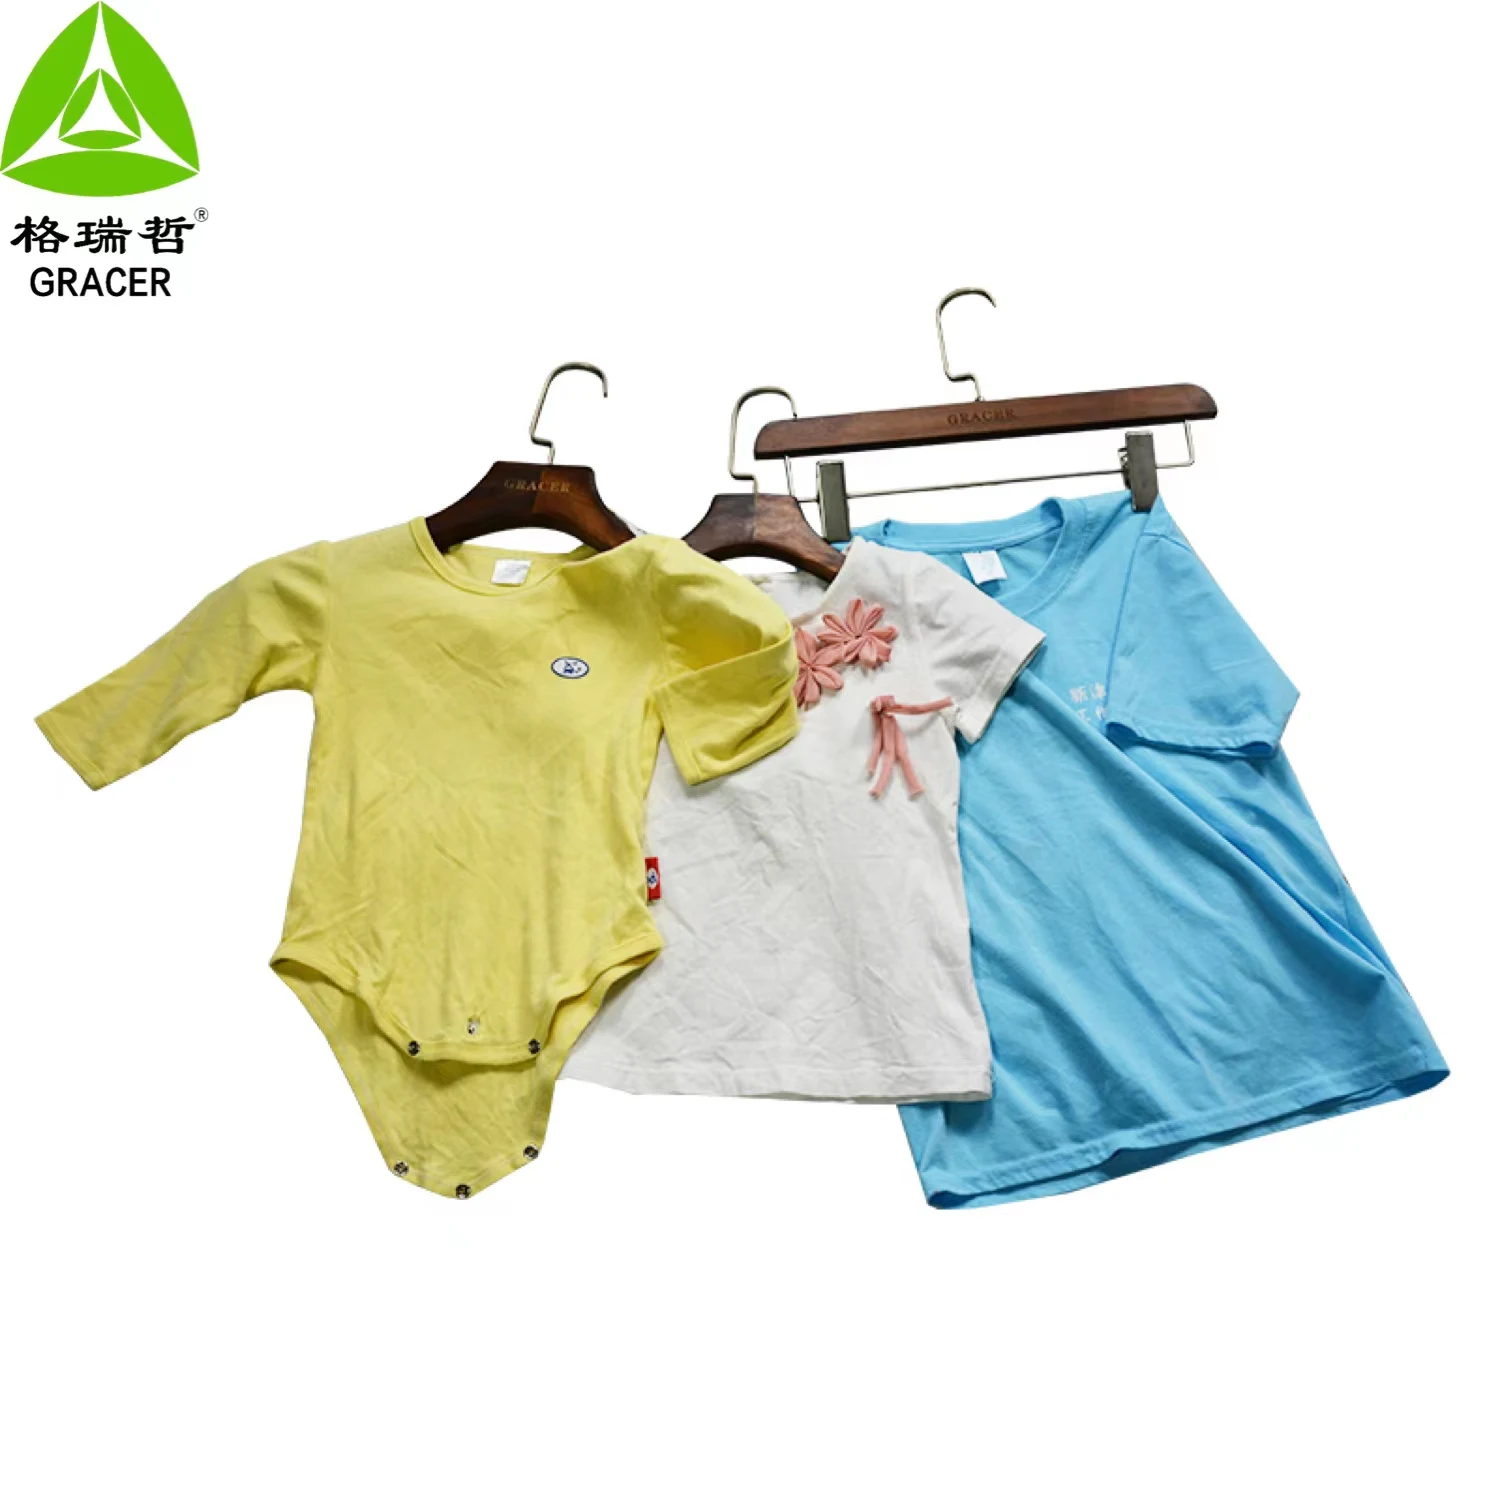 Cheap Wholesale Second Hand Vintage Used Clothing Clothes Summer Children Clothes Kids Recycled Mixed Branded Clothing In Bulk